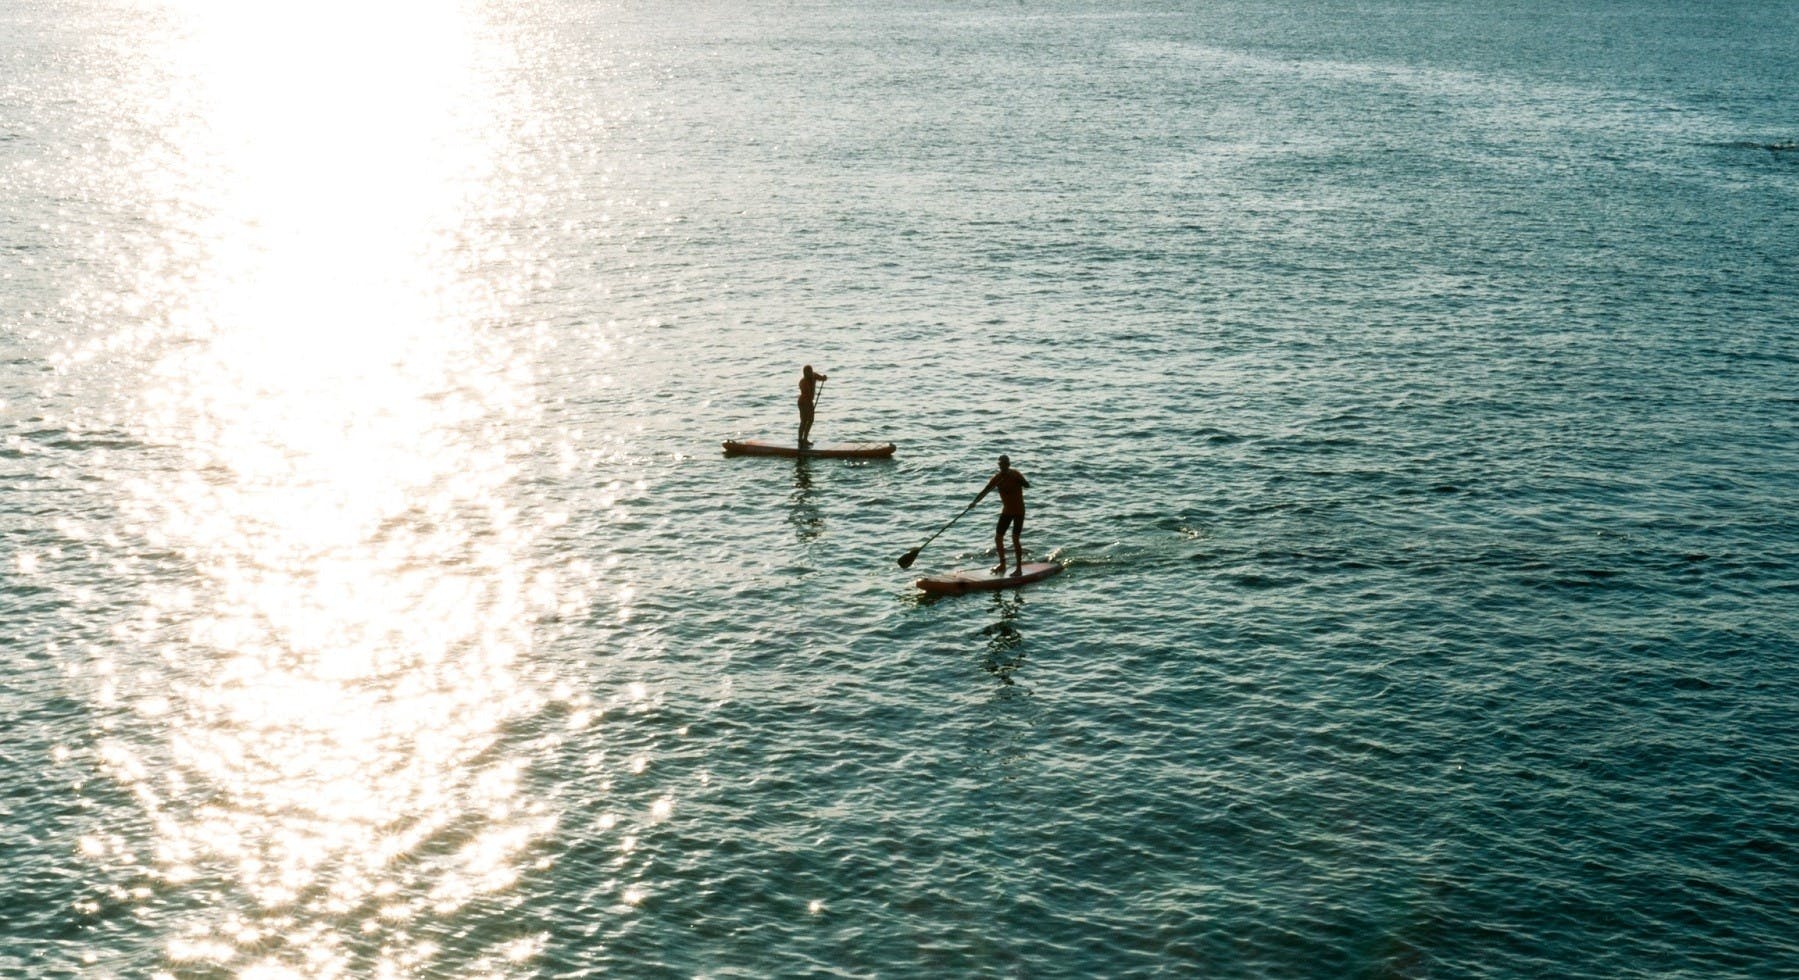 Paddleboard taster and guided tour in Newquay